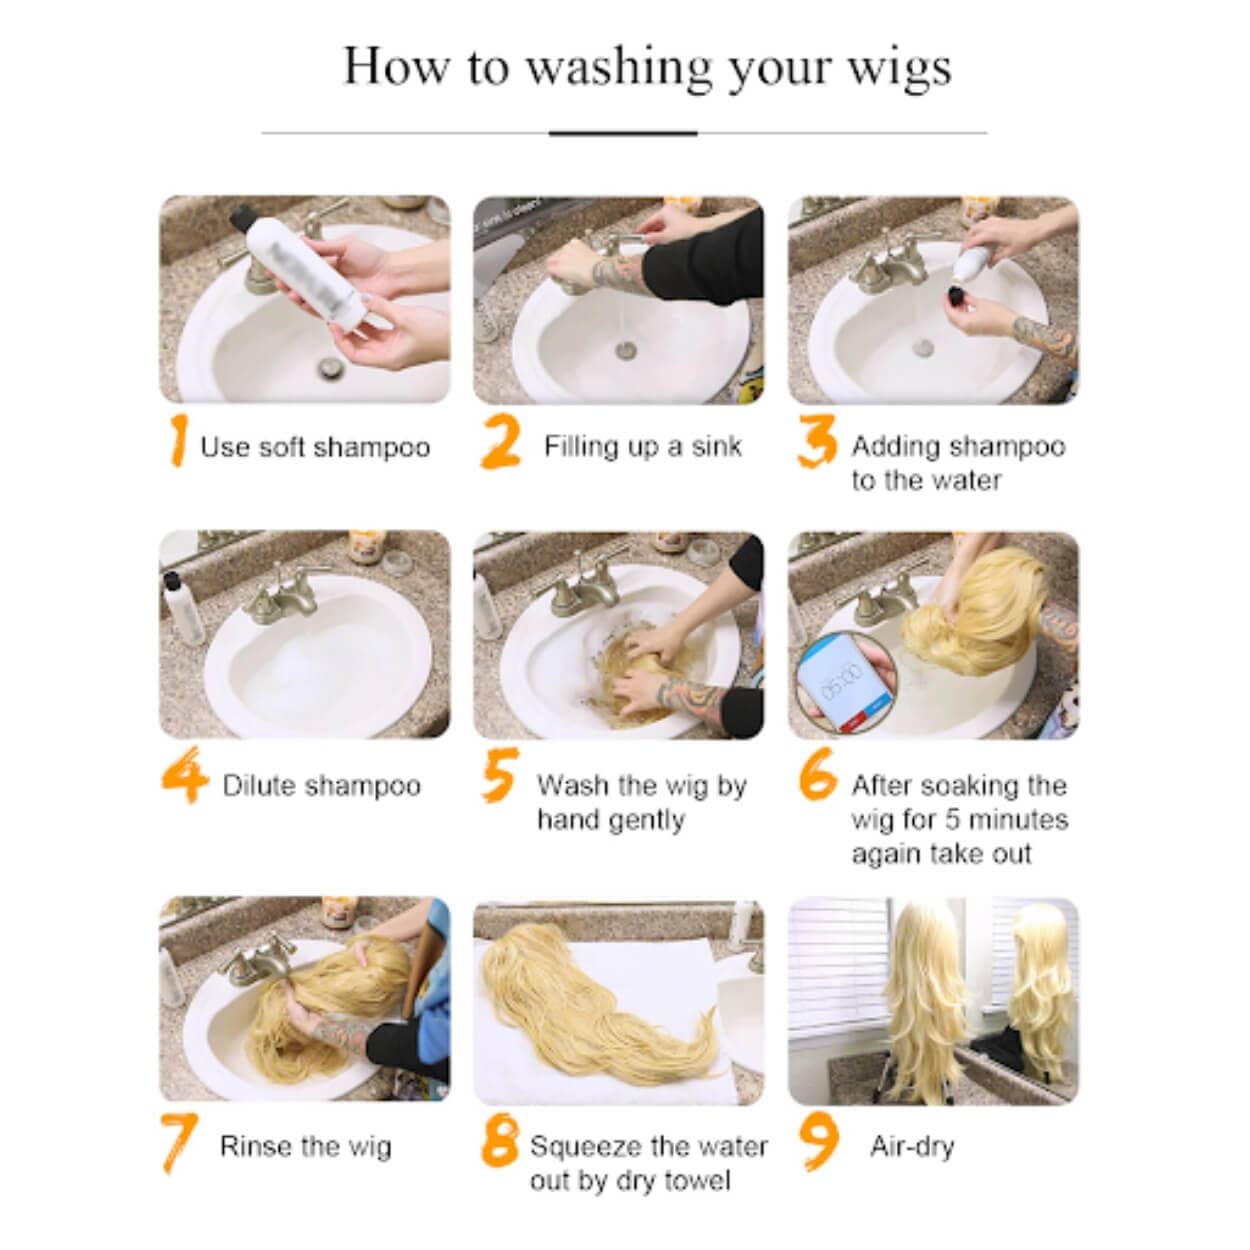 Instructions for Wigs